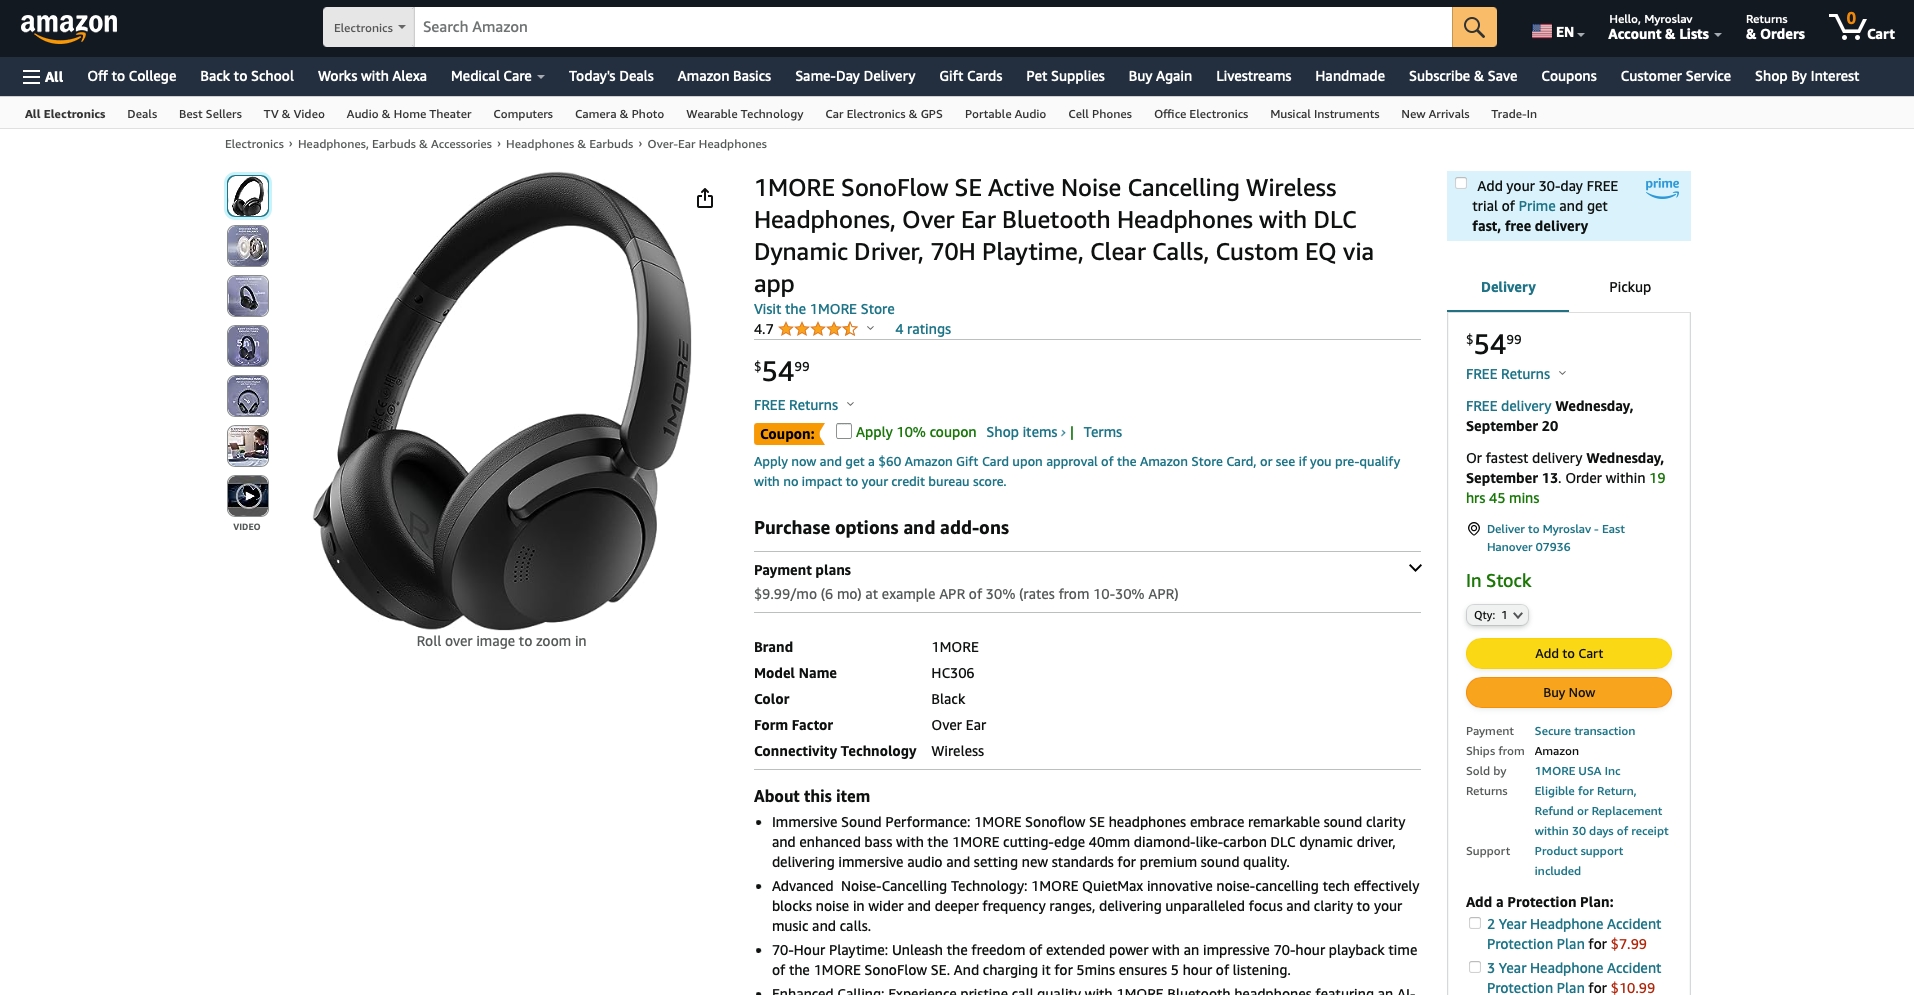 1MORE SonoFlow SE Active Noise Cancelling Wireless Headphones, Over Ear  Bluetooth Headphones with DLC Dynamic Driver, 70H Playtime, Clear Calls